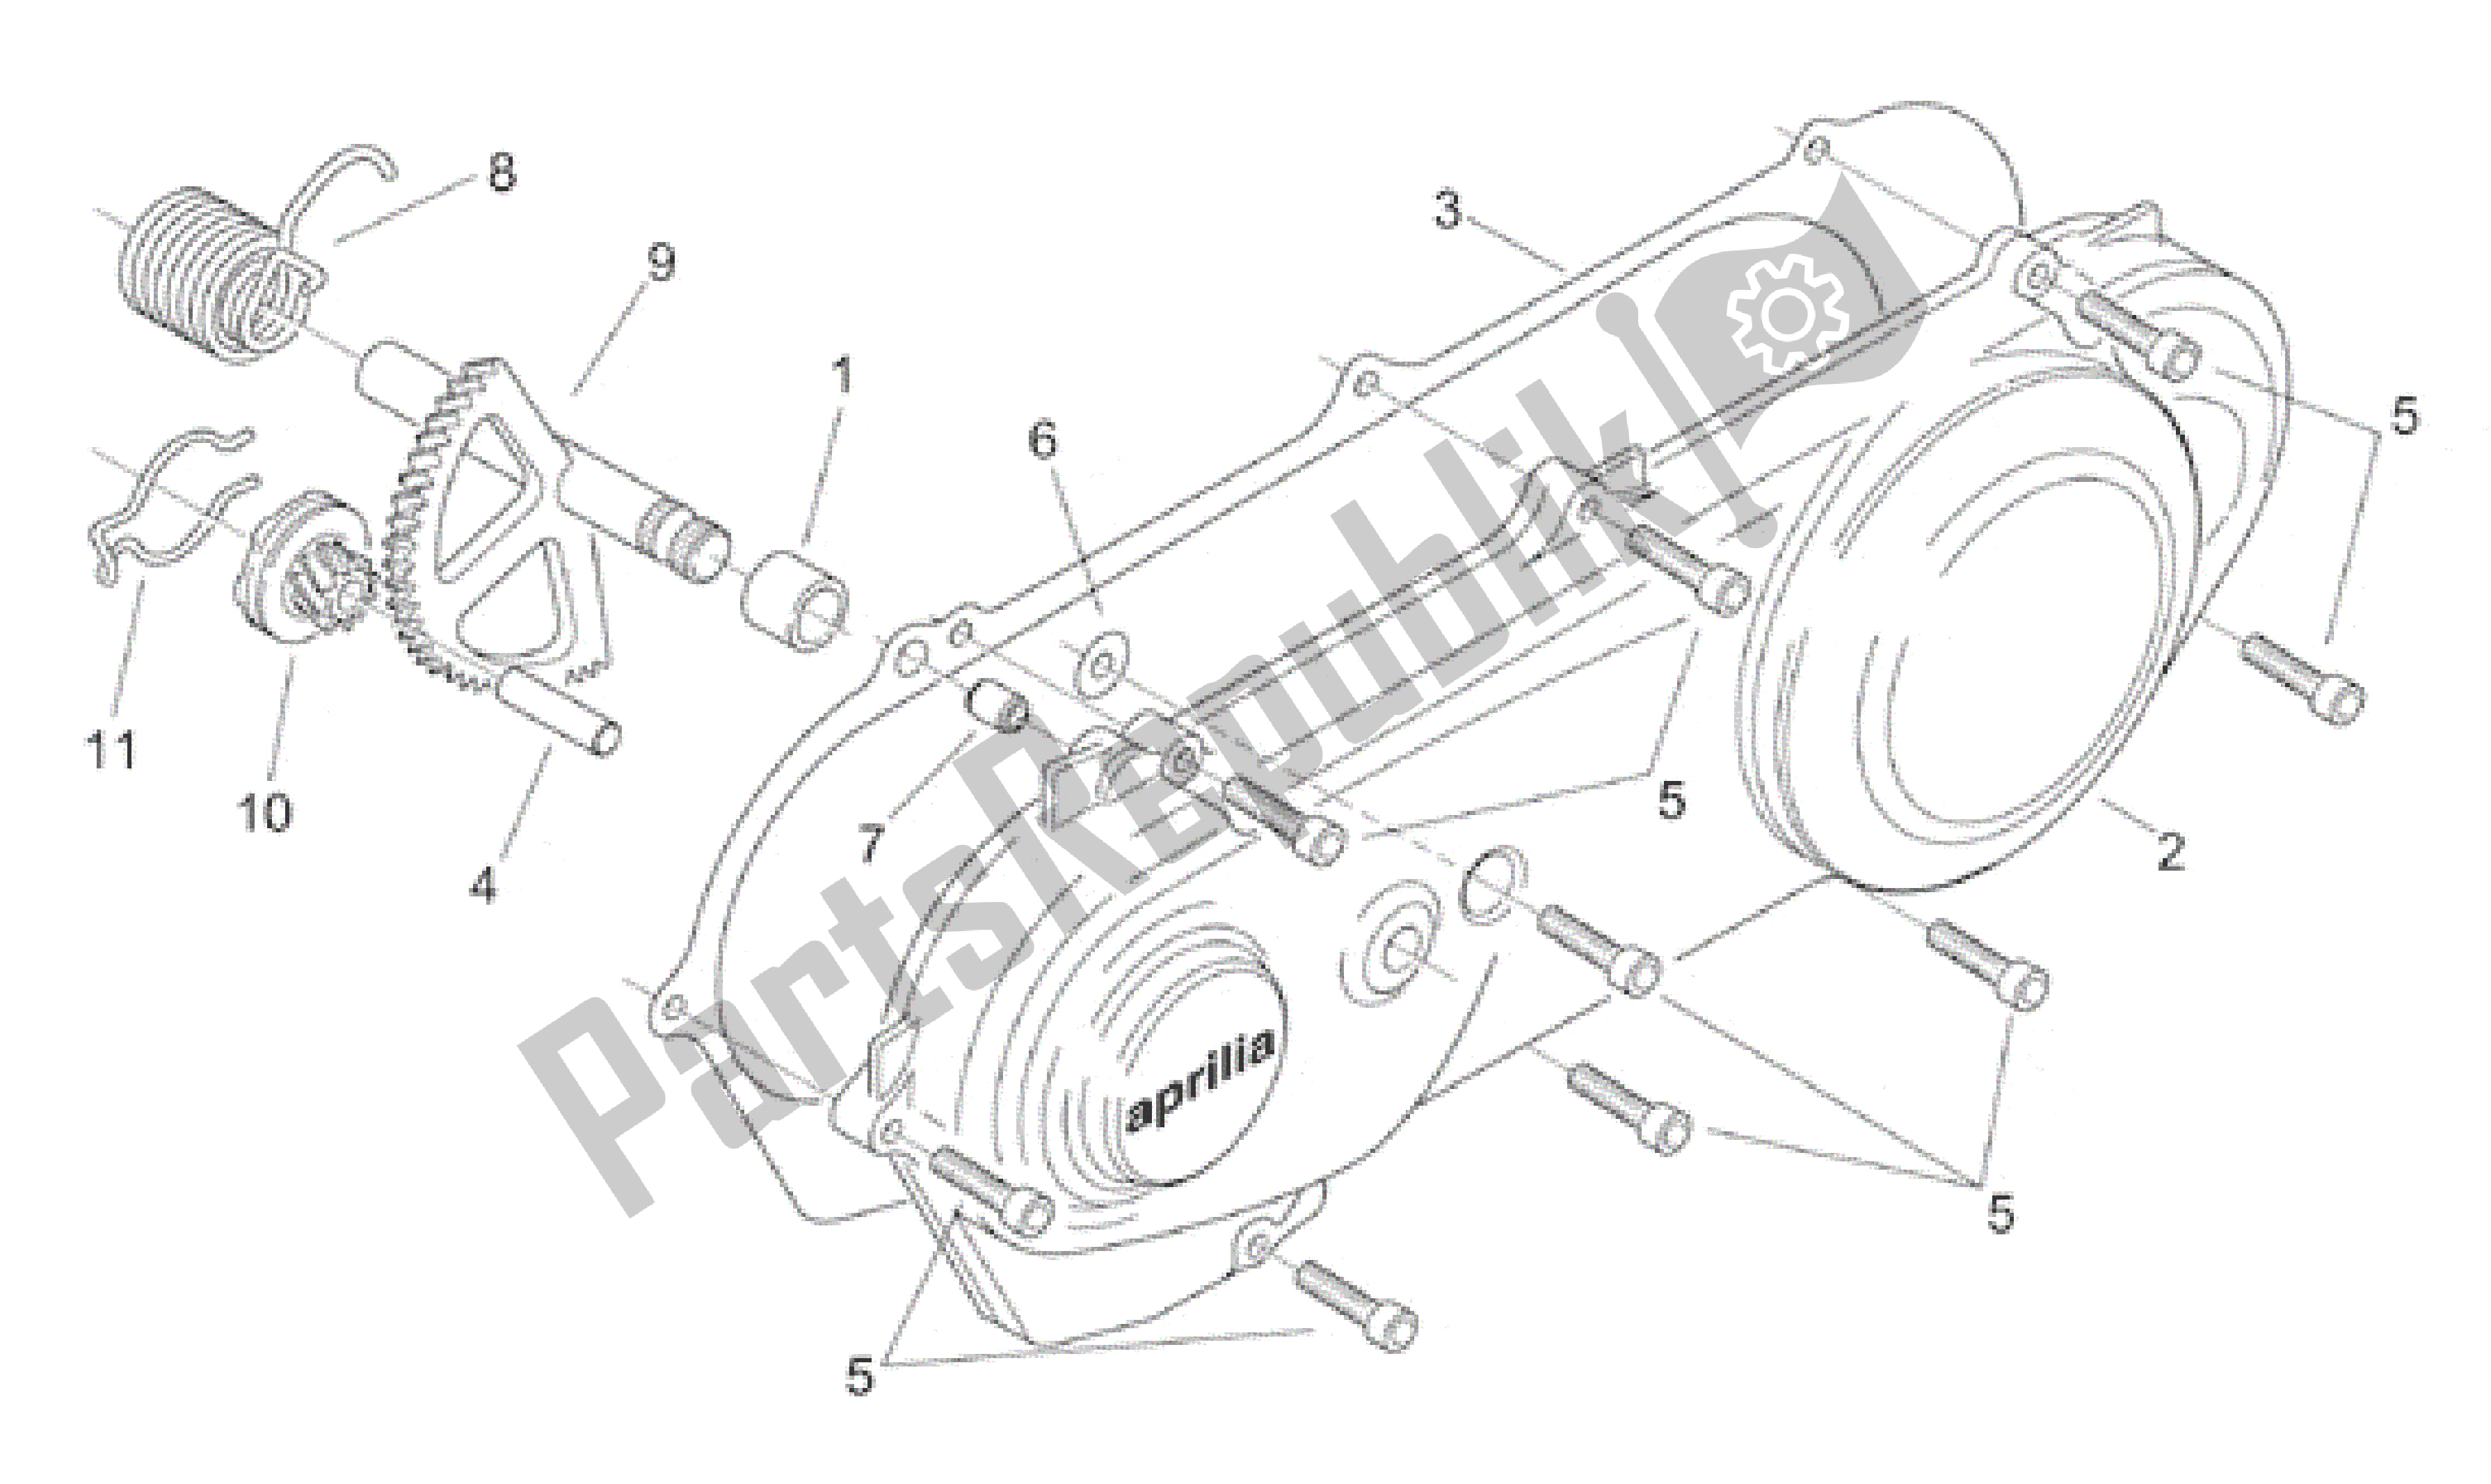 All parts for the Cover - Kick Starter of the Aprilia Habana 50 1999 - 2001